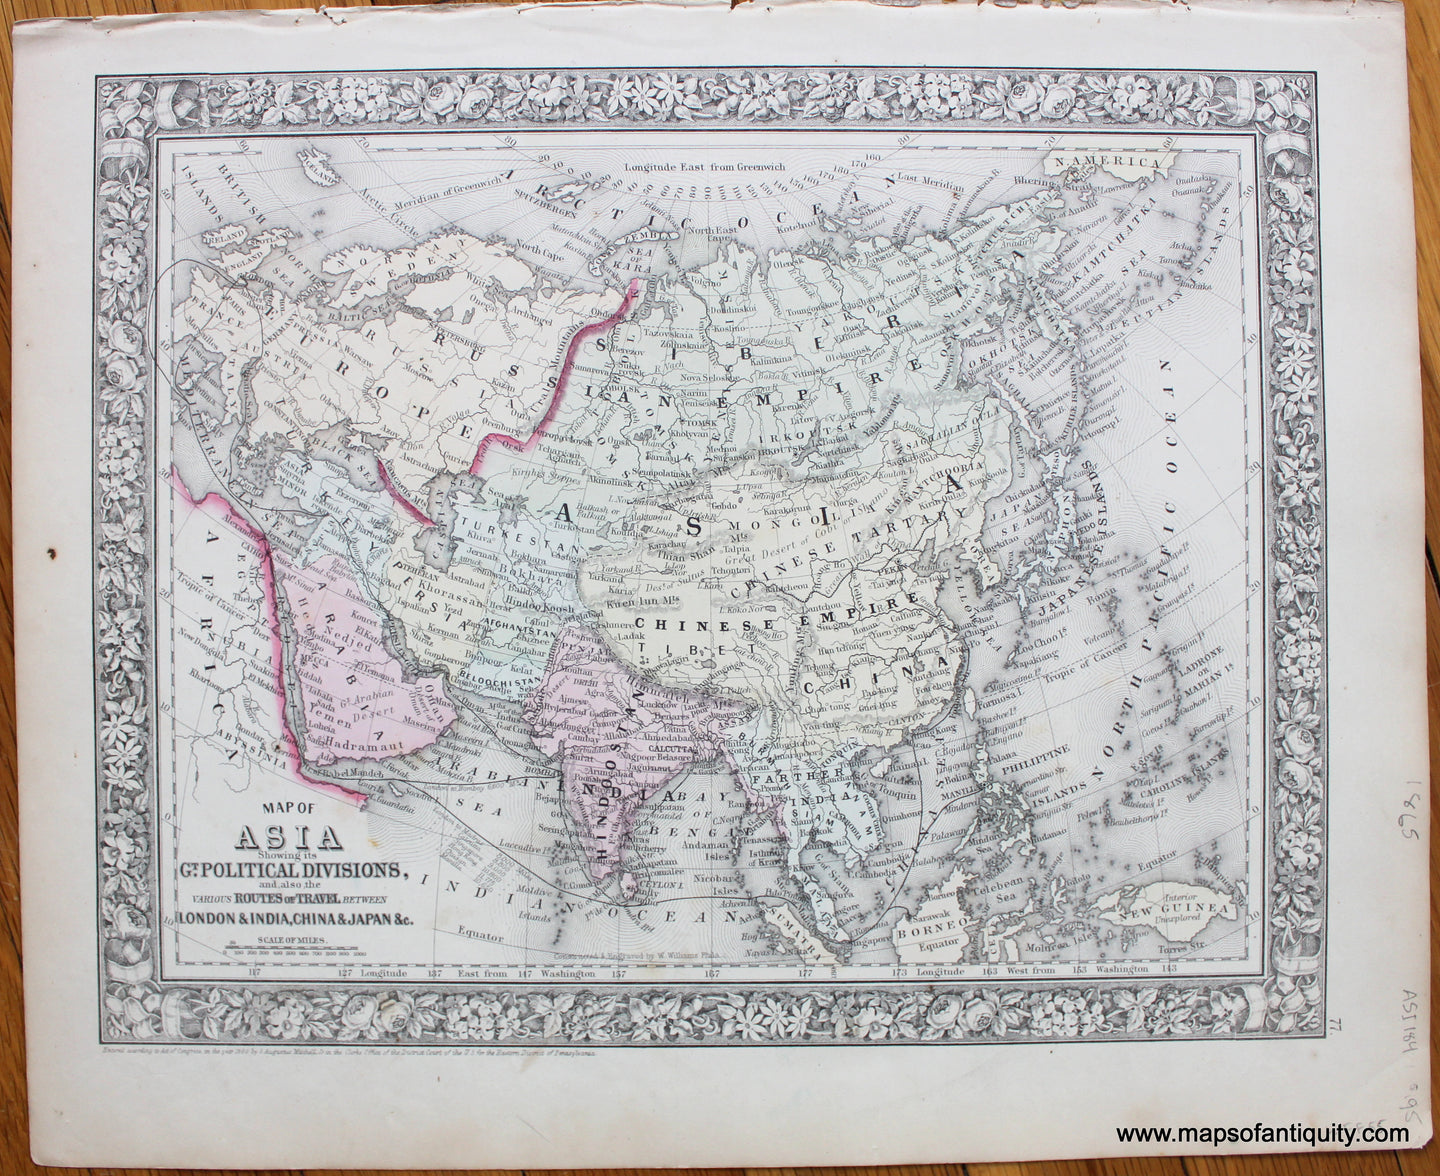 Antique-Hand-Colored-Map-Map-of-Asia-Showing-its-Gt.-Political-Divisions-and-also-the-Various-Routes-of-Travel-Between-London-and-India-China-and-Japan-etc.-Asia-Asia-1865-Mitchell-Maps-Of-Antiquity